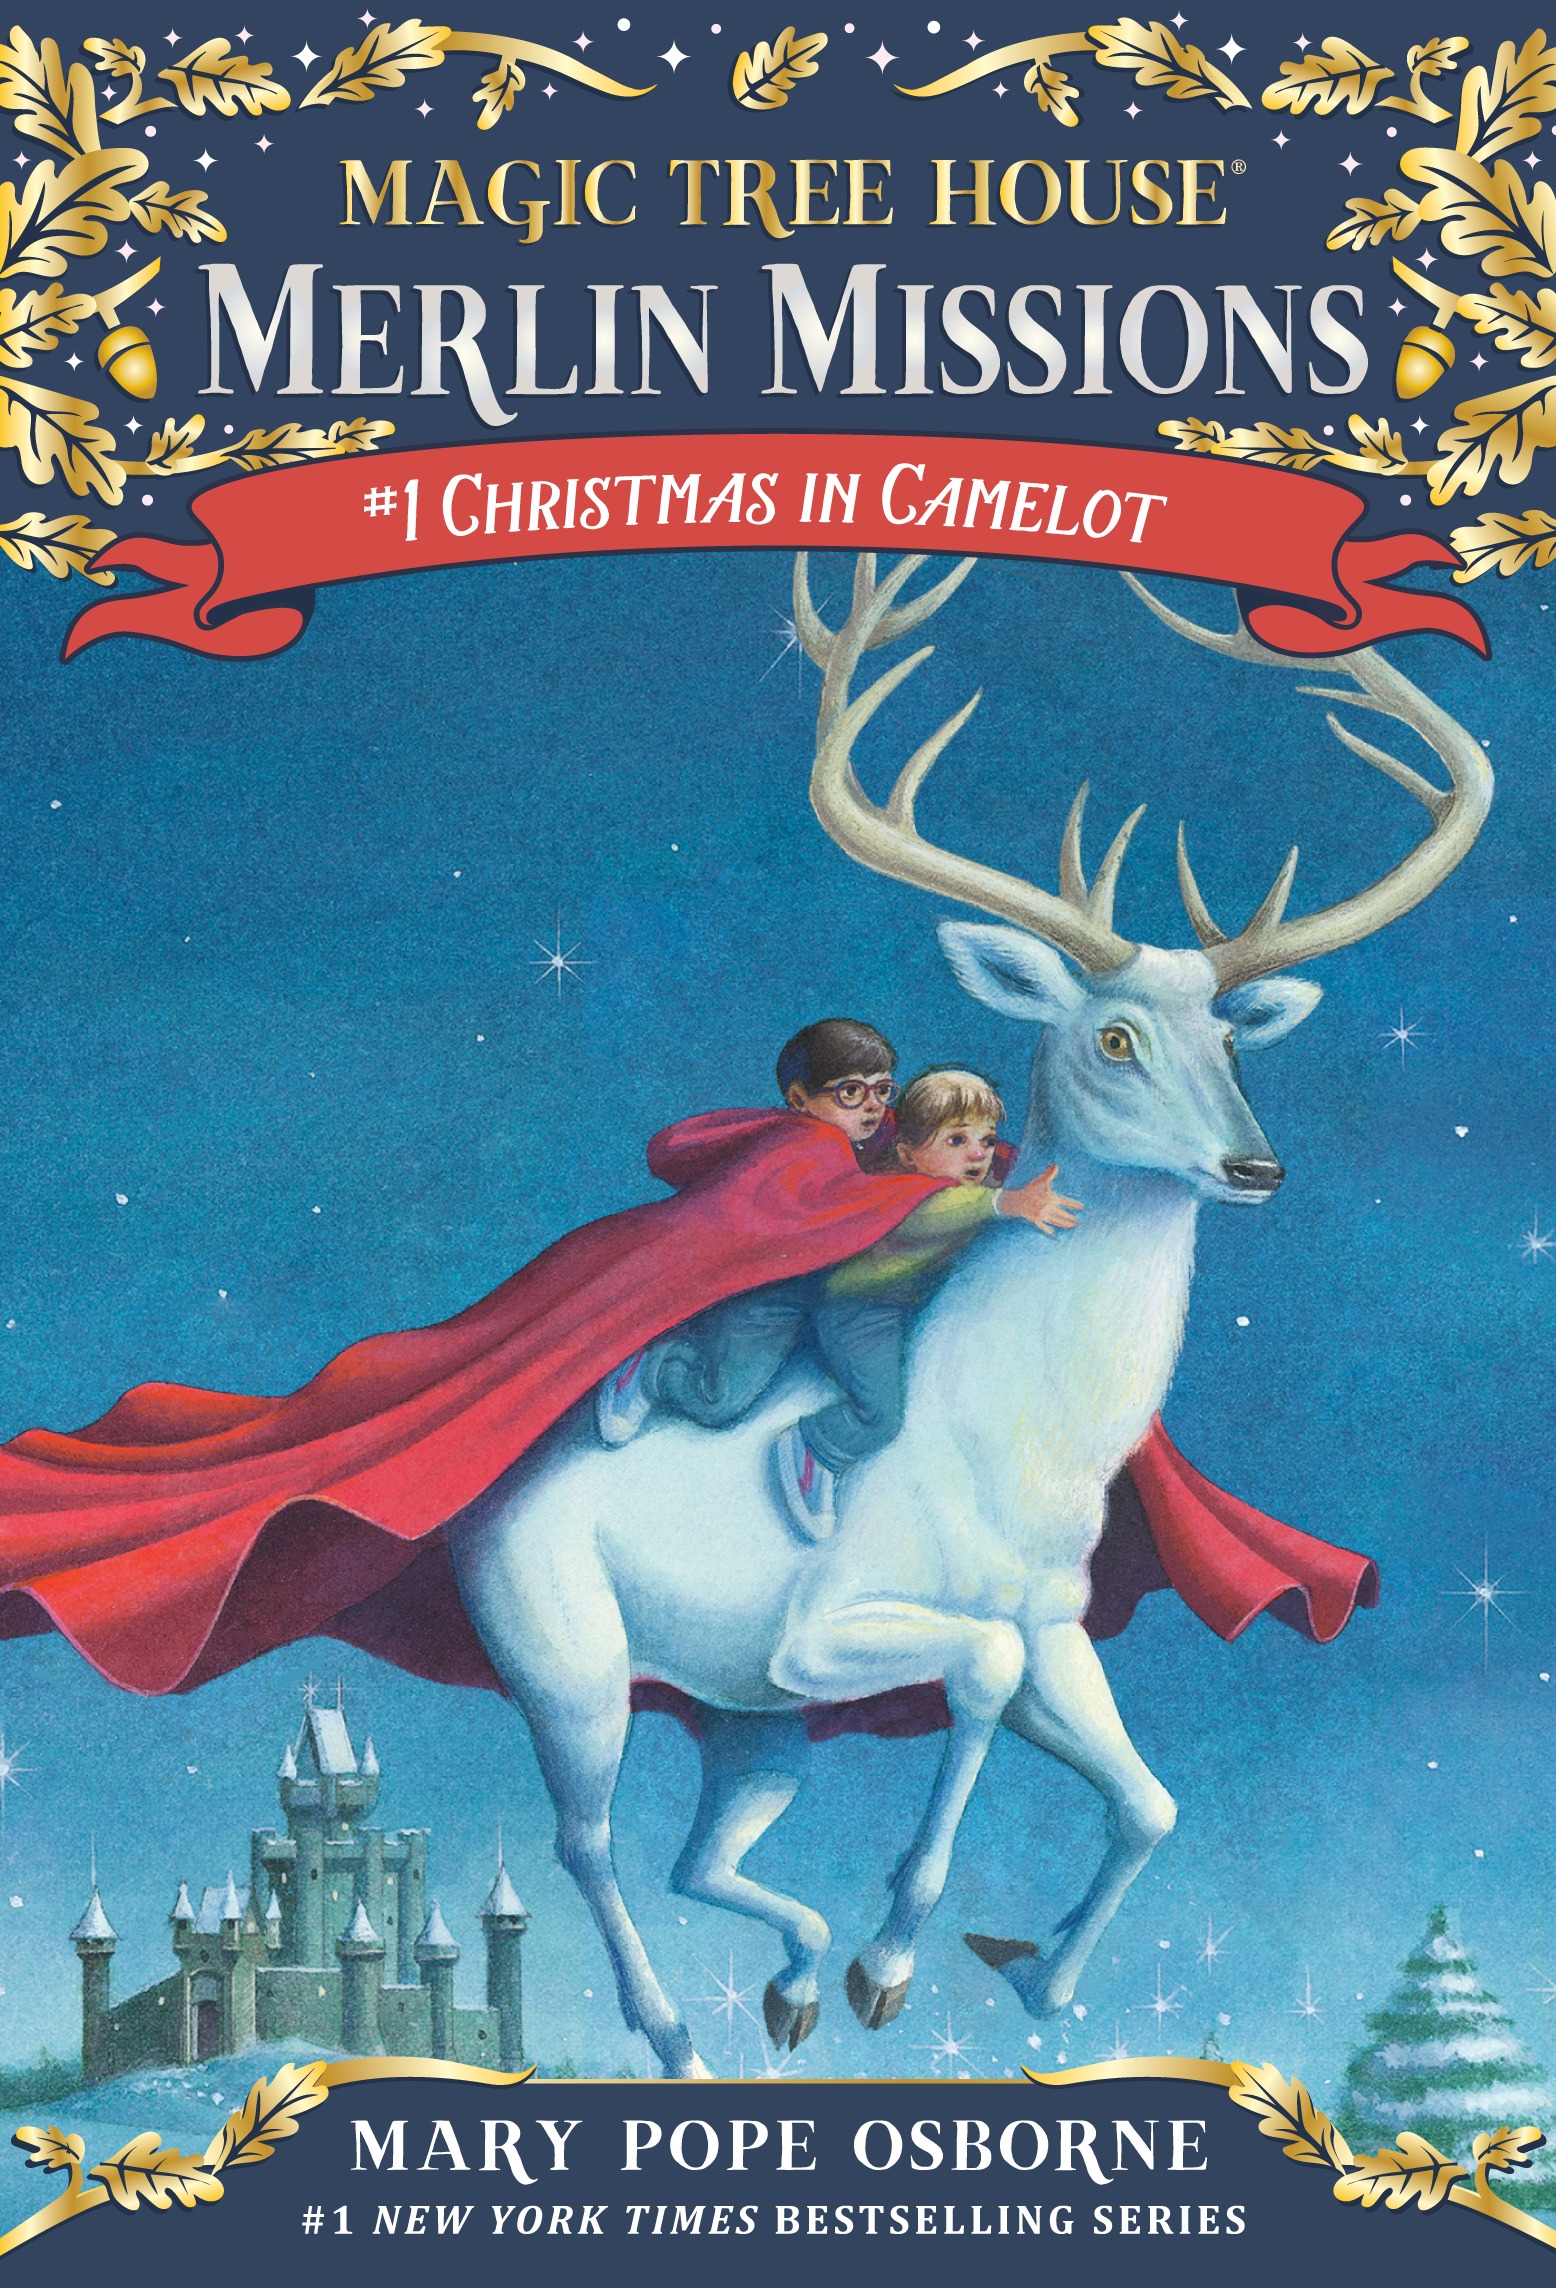 Magic Tree House Merlin Missions #1:Christmas in Camelot (PB)